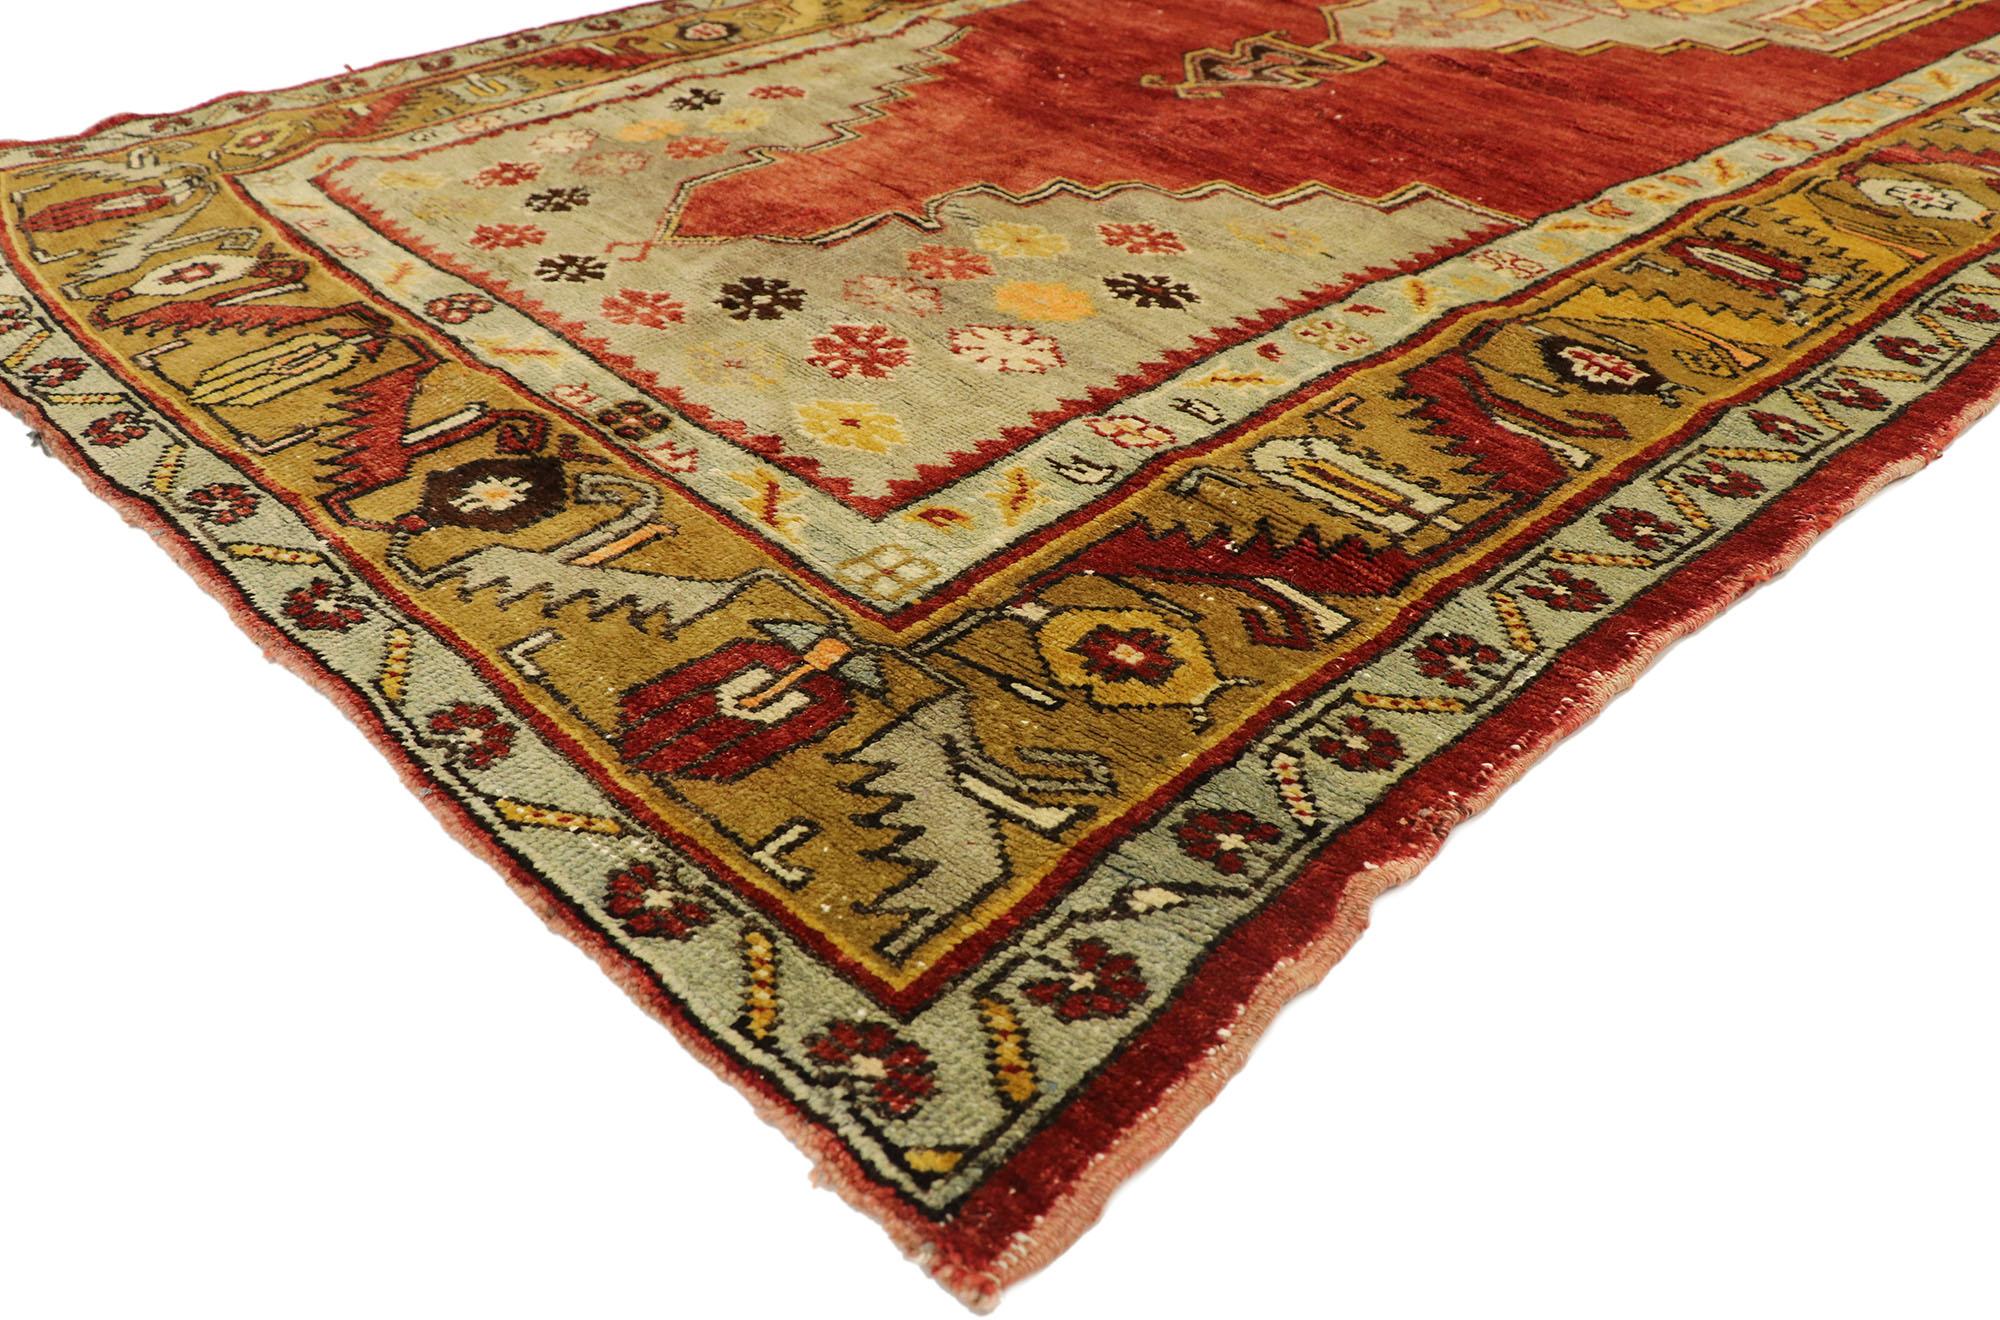 51716, vintage Turkish Oushak Gallery Rug with Tudor Style, Wide Hallway Runner 04'08 x 12'01. Rustic and refined, this hand knotted wool vintage Turkish Oushak gallery rug features a large stepped hexagonal medallion with anchor pendants floating